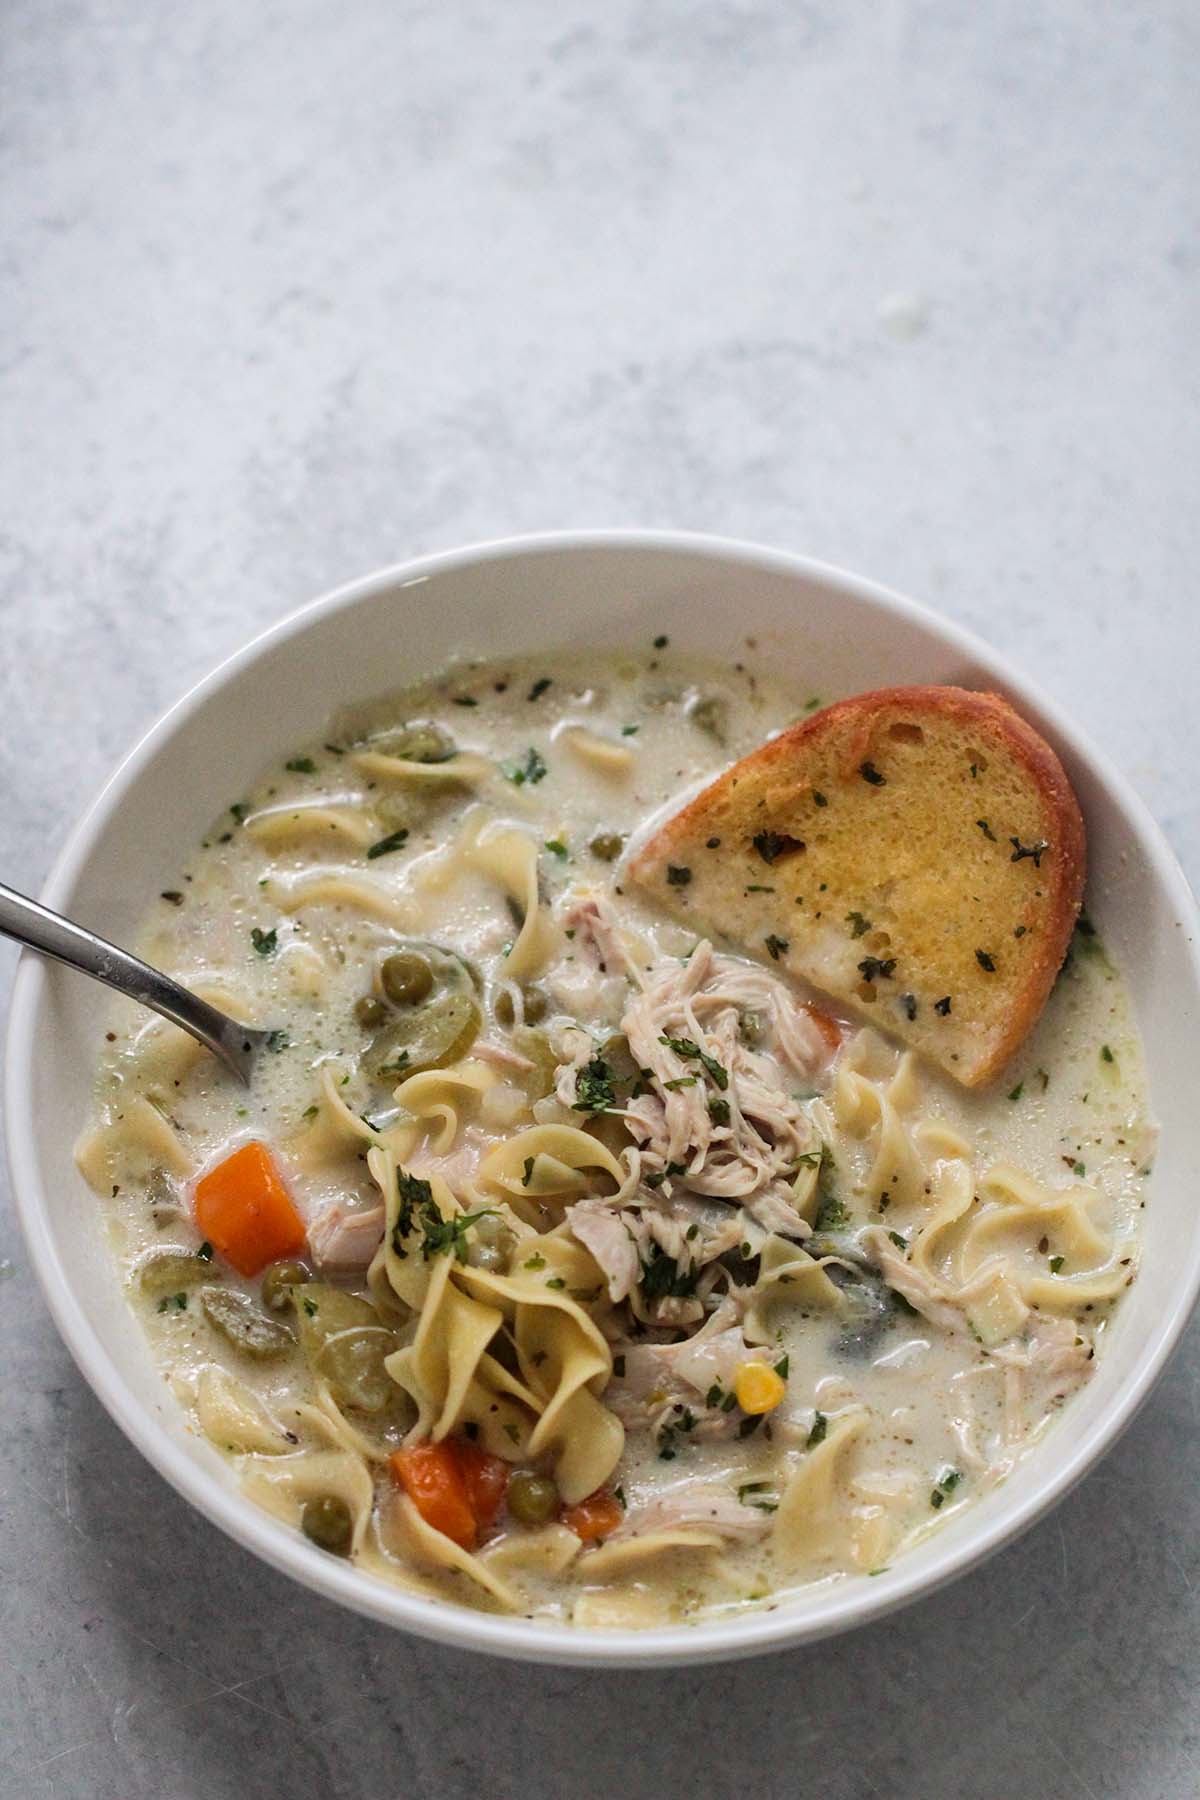 https://www.cookedbyjulie.com/wp-content/uploads/2021/10/instant-pot-creamy-chicken-noodle-soup-one.jpg